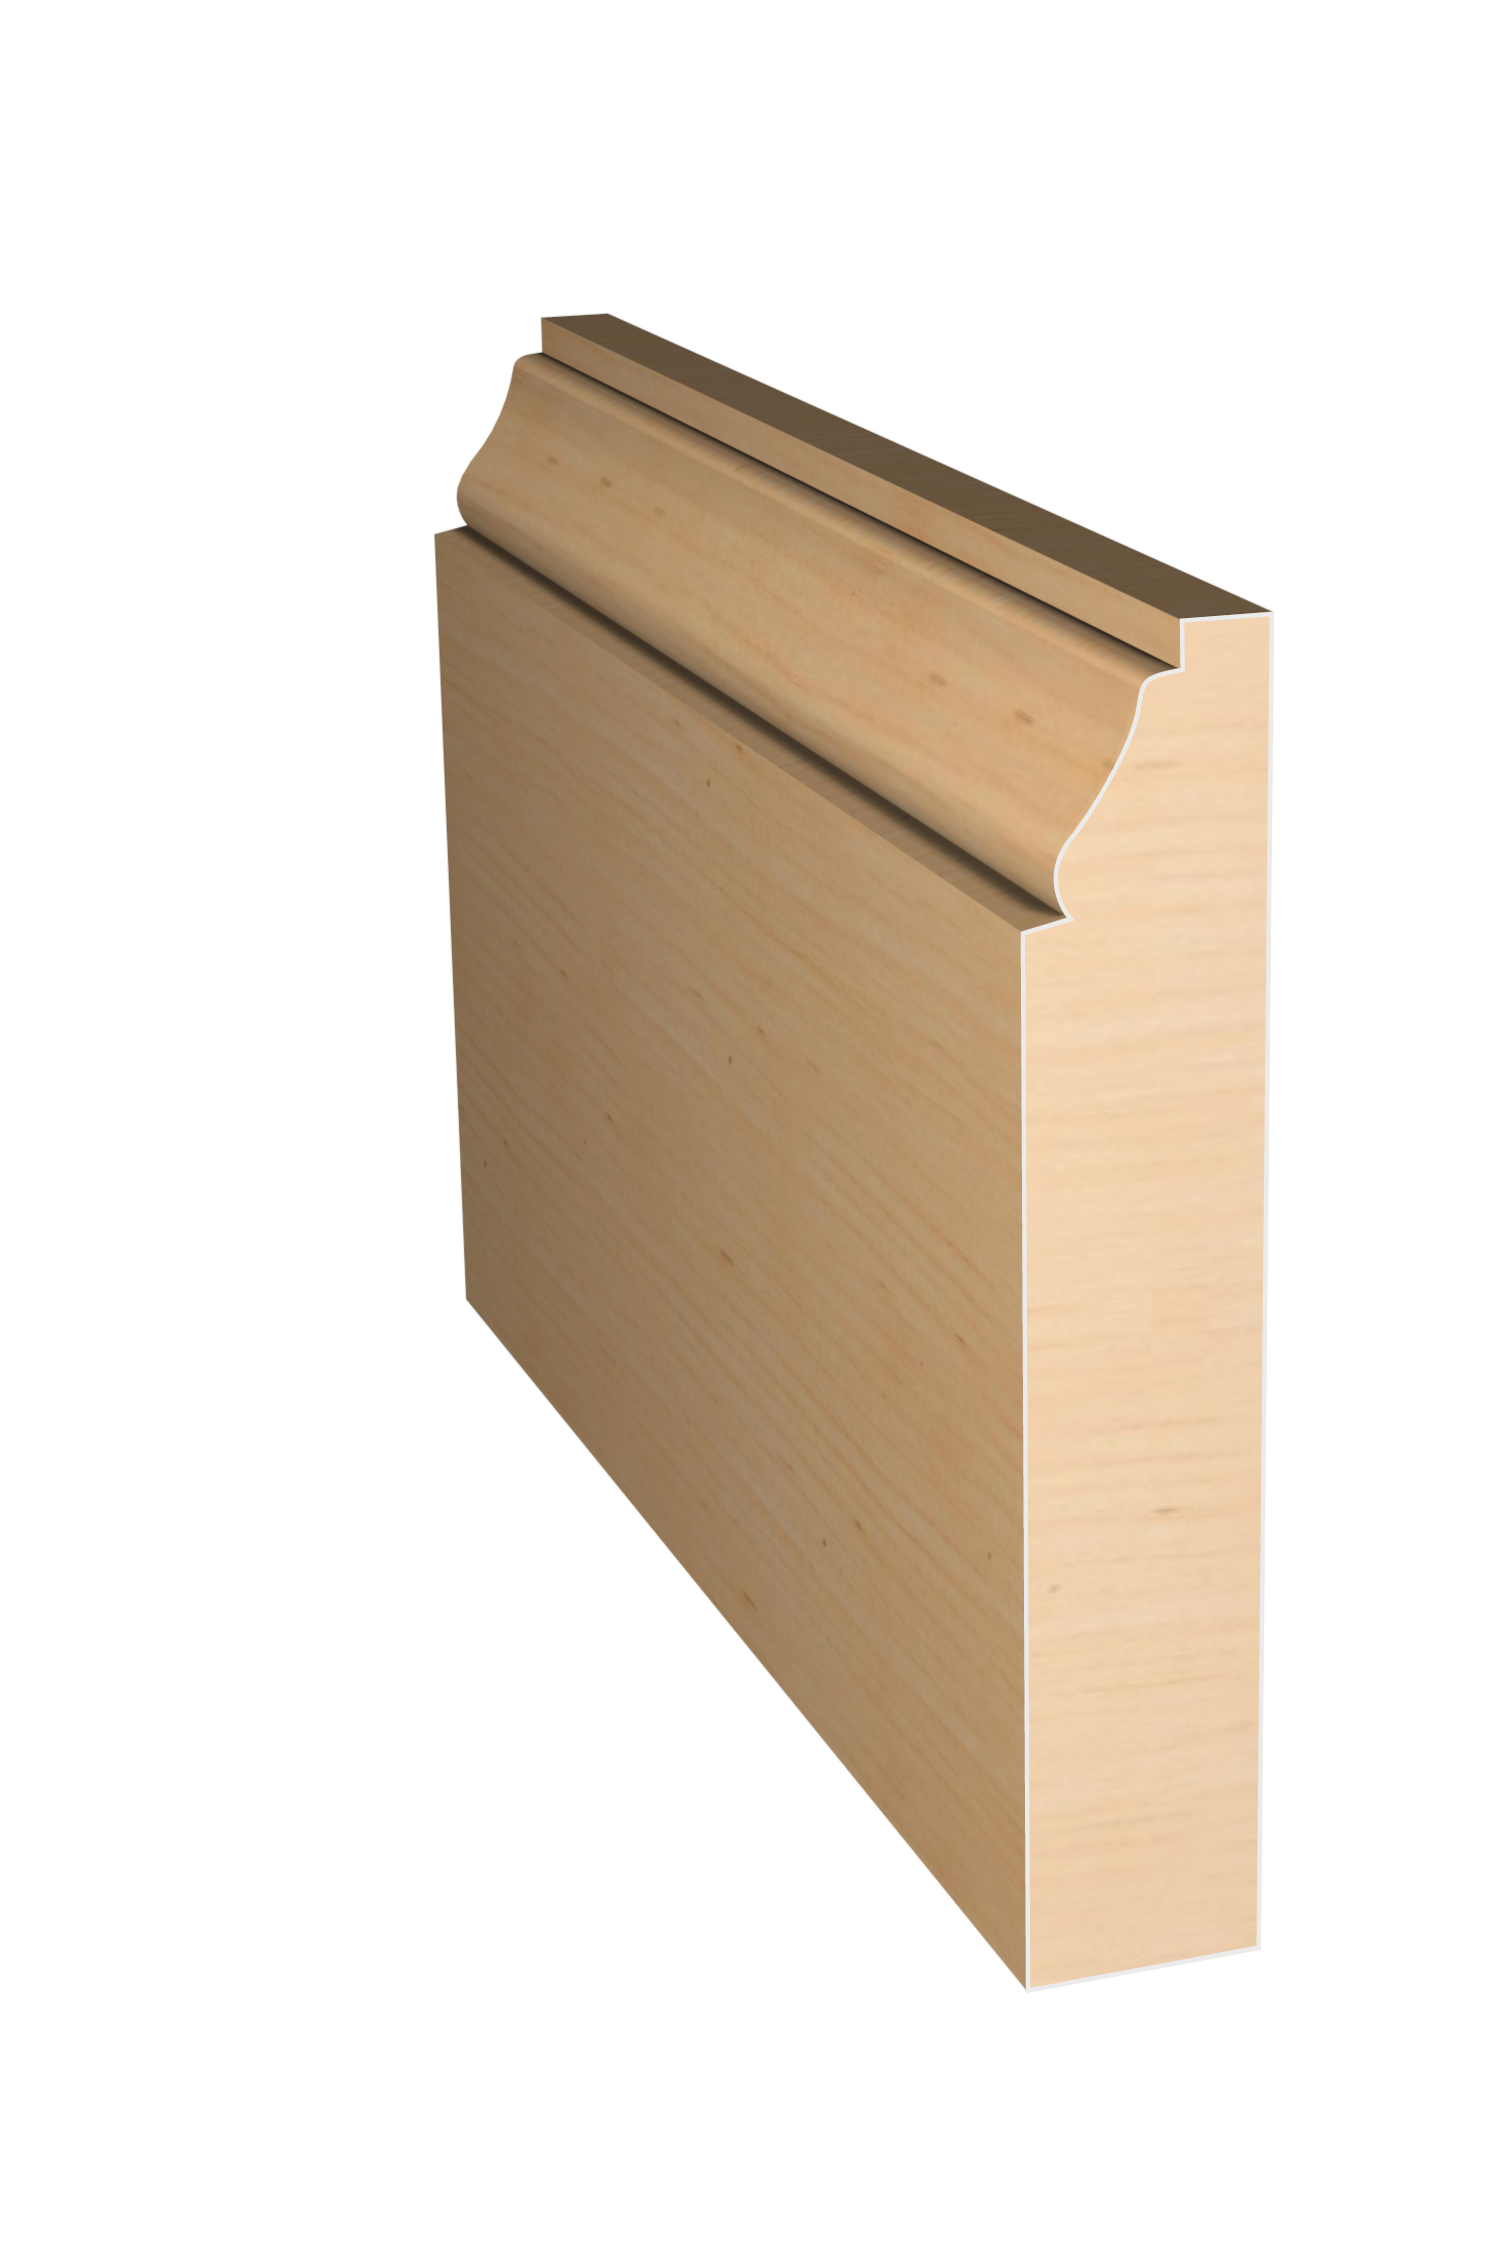 Three dimensional rendering of custom casing wood molding CAPL33410 made by Public Lumber Company in Detroit.